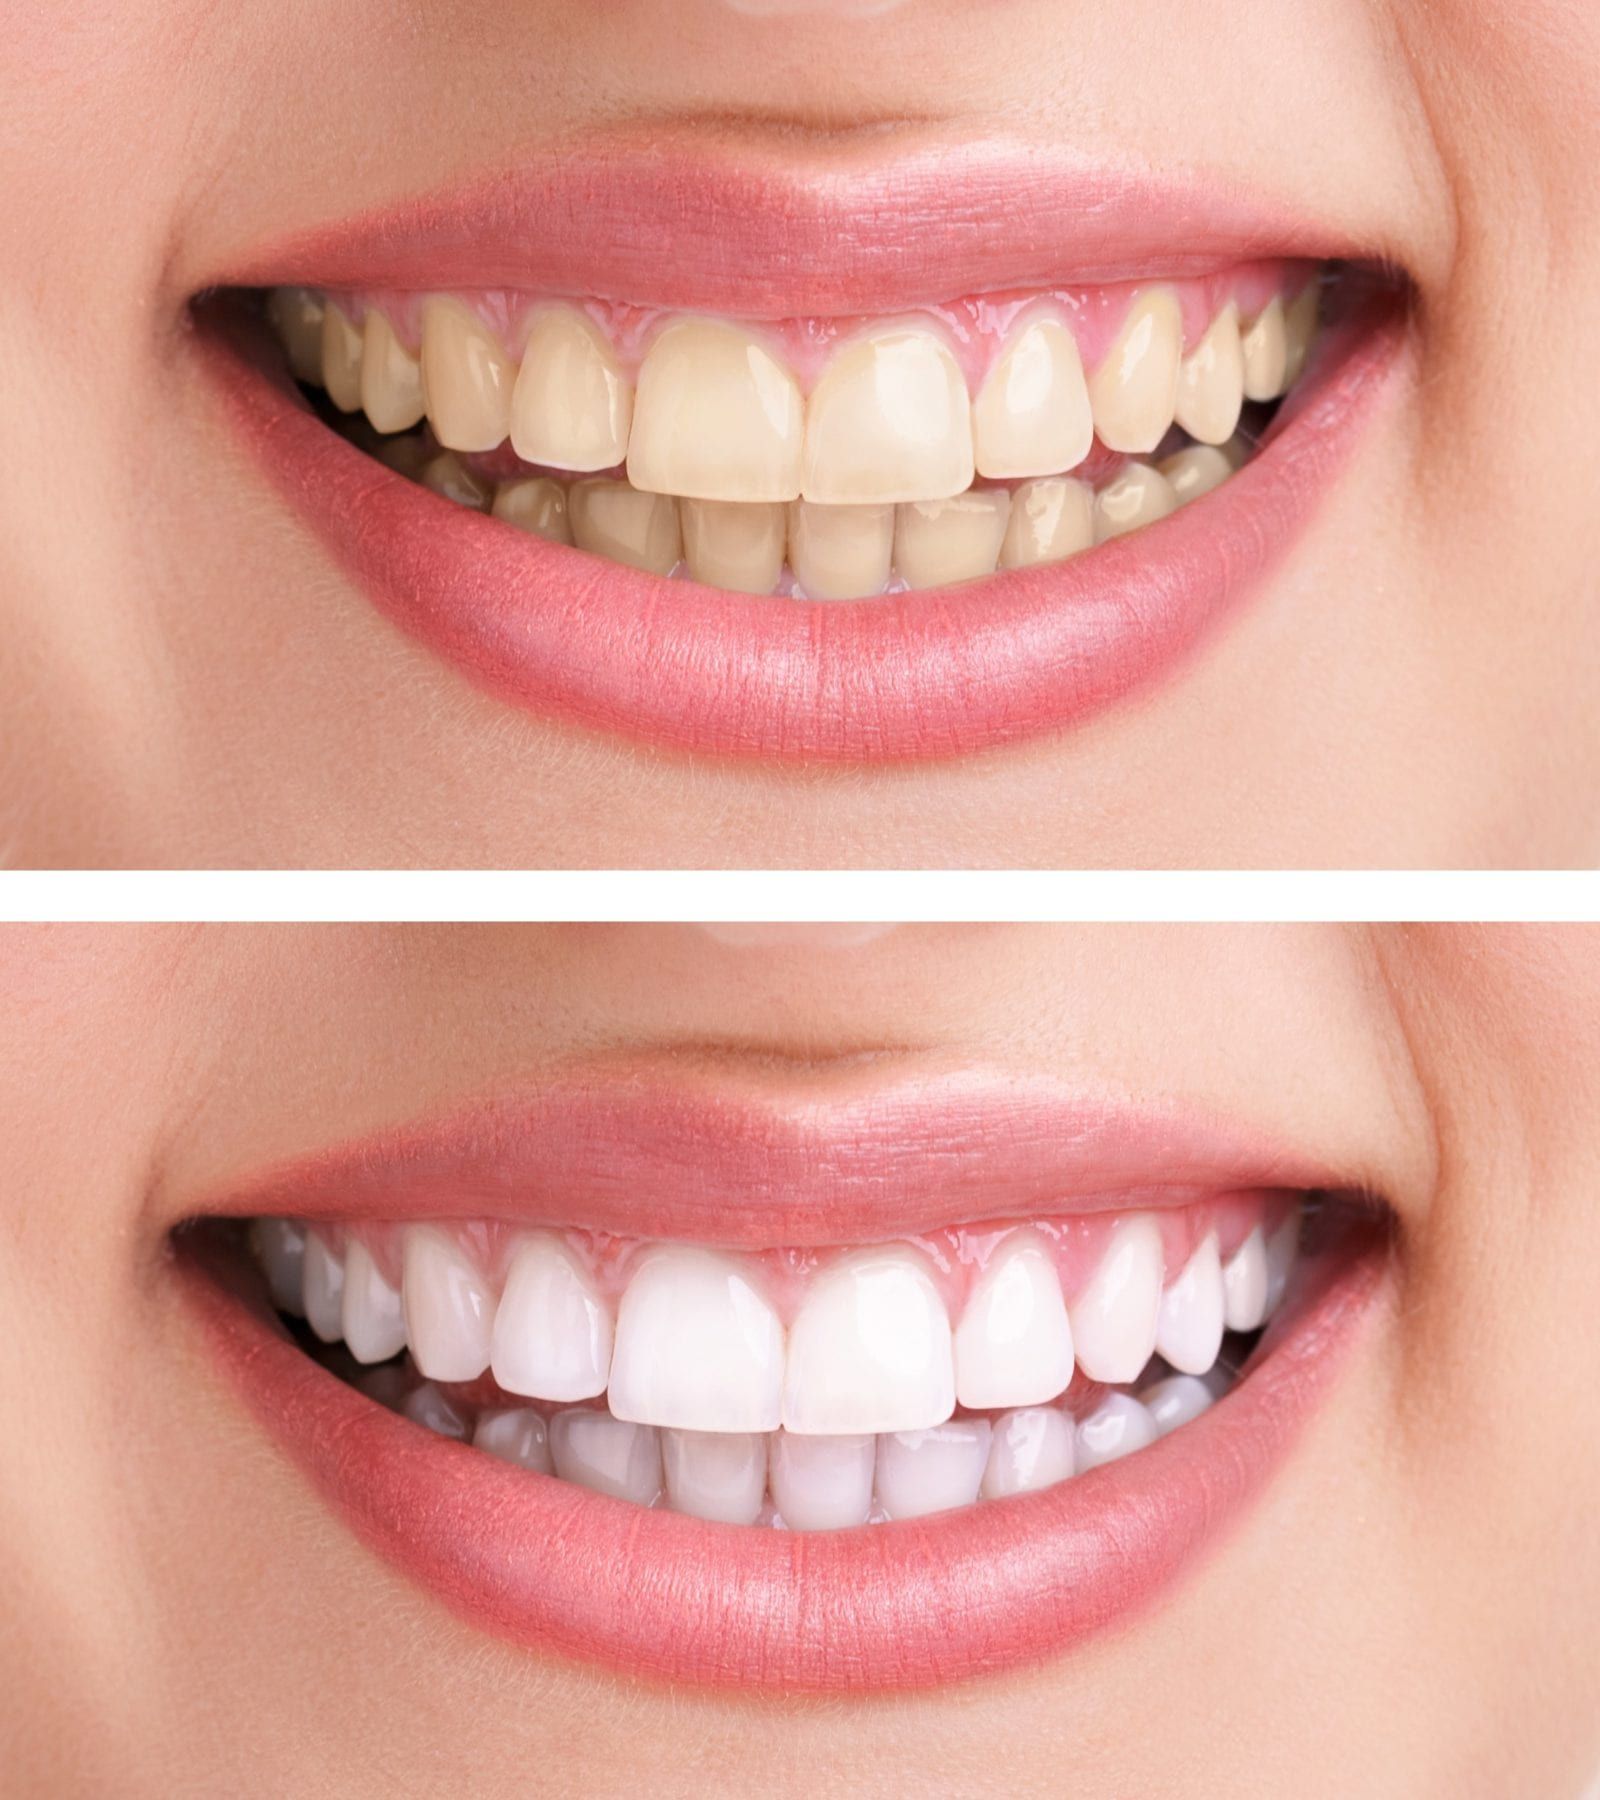 before and after teeth whitening treatment